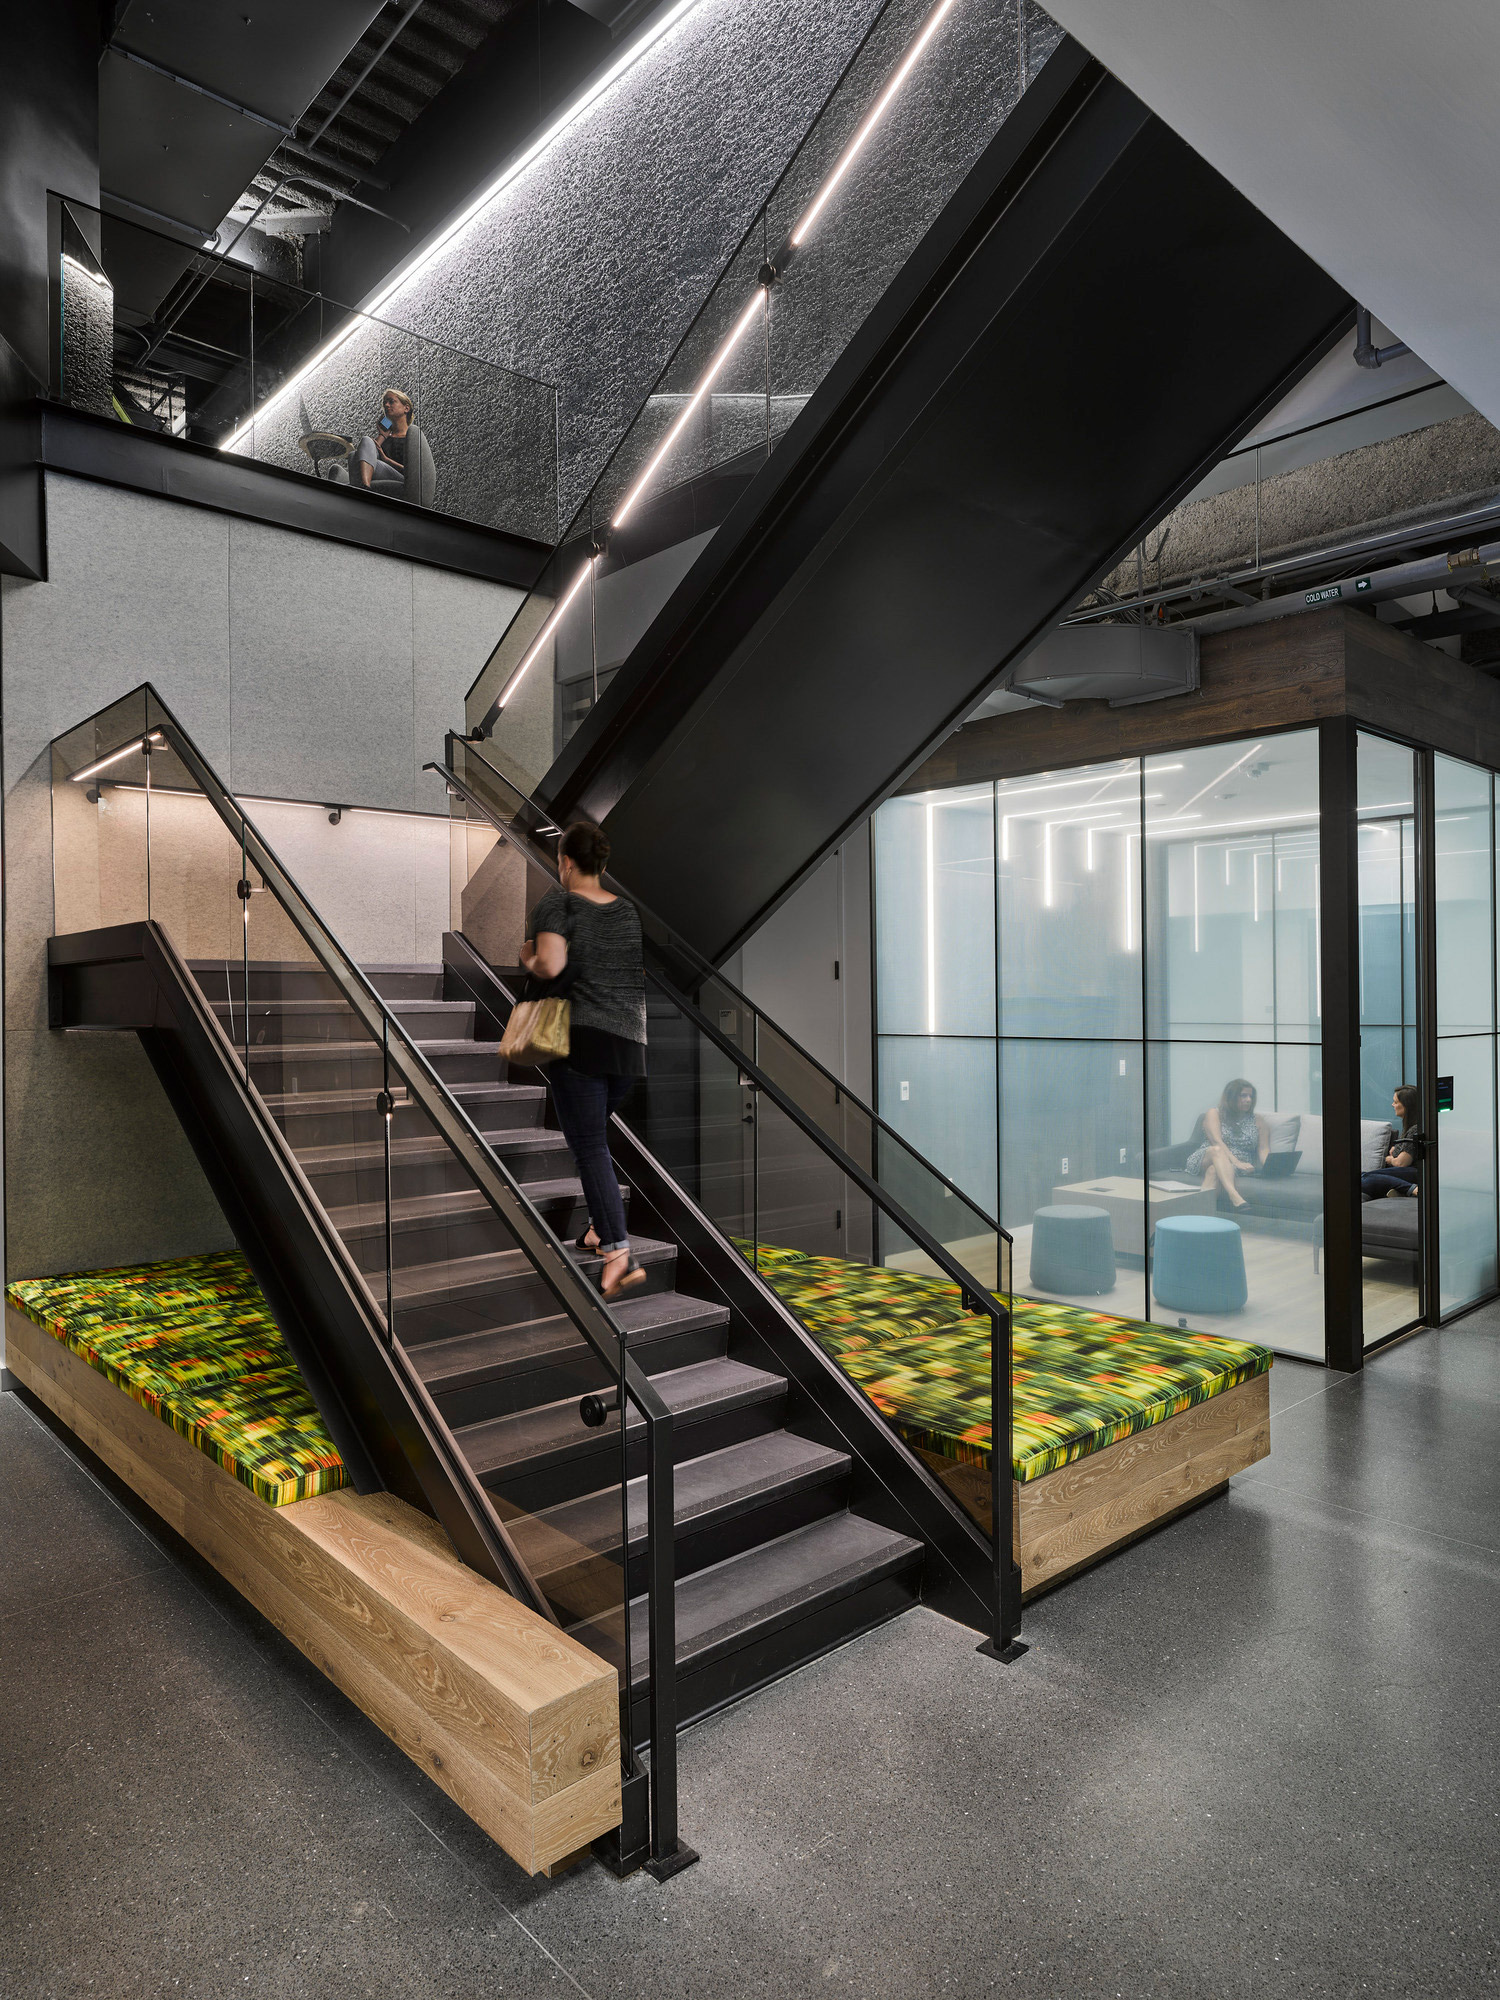 Modern office stairway linking two levels, featuring black metal railings, wood accented steps with vibrant green foliage patterned carpet inlay, set against an industrial concrete and exposed black ceiling backdrop, with glass-walled meeting rooms visible in the background.